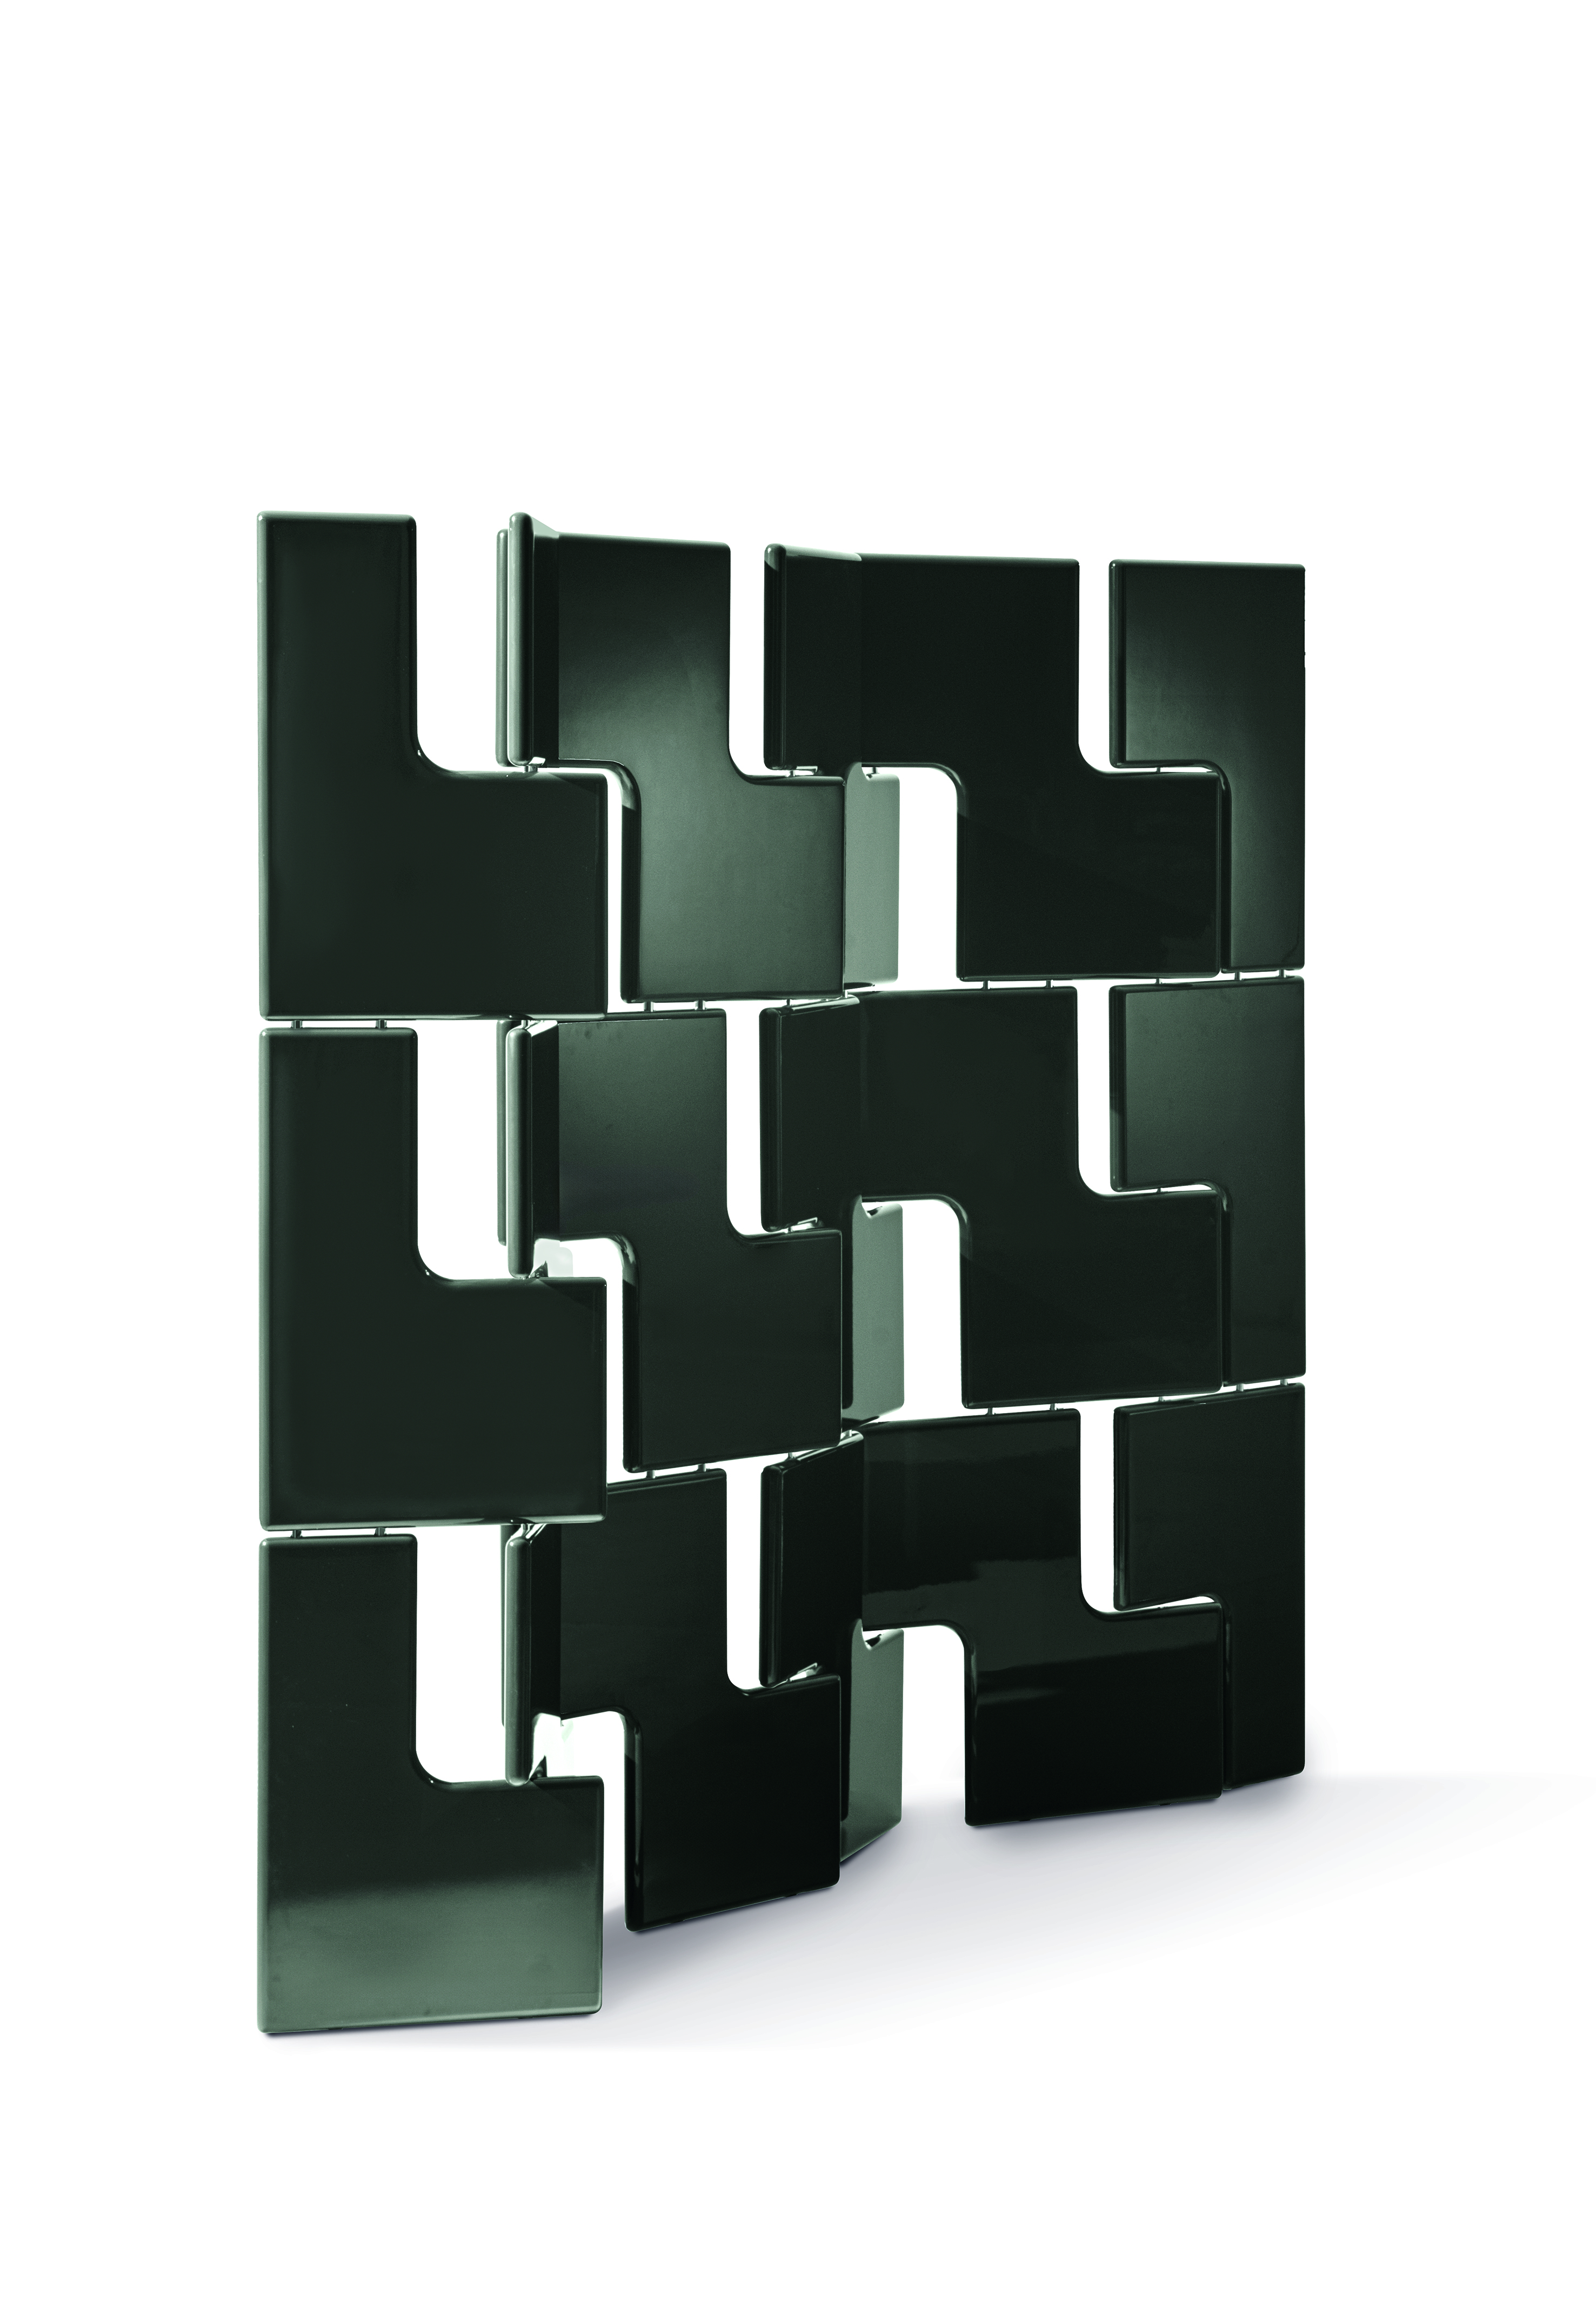 Milan Design Week Minotti Janis room divider panel in black glossy puzzle like pieces